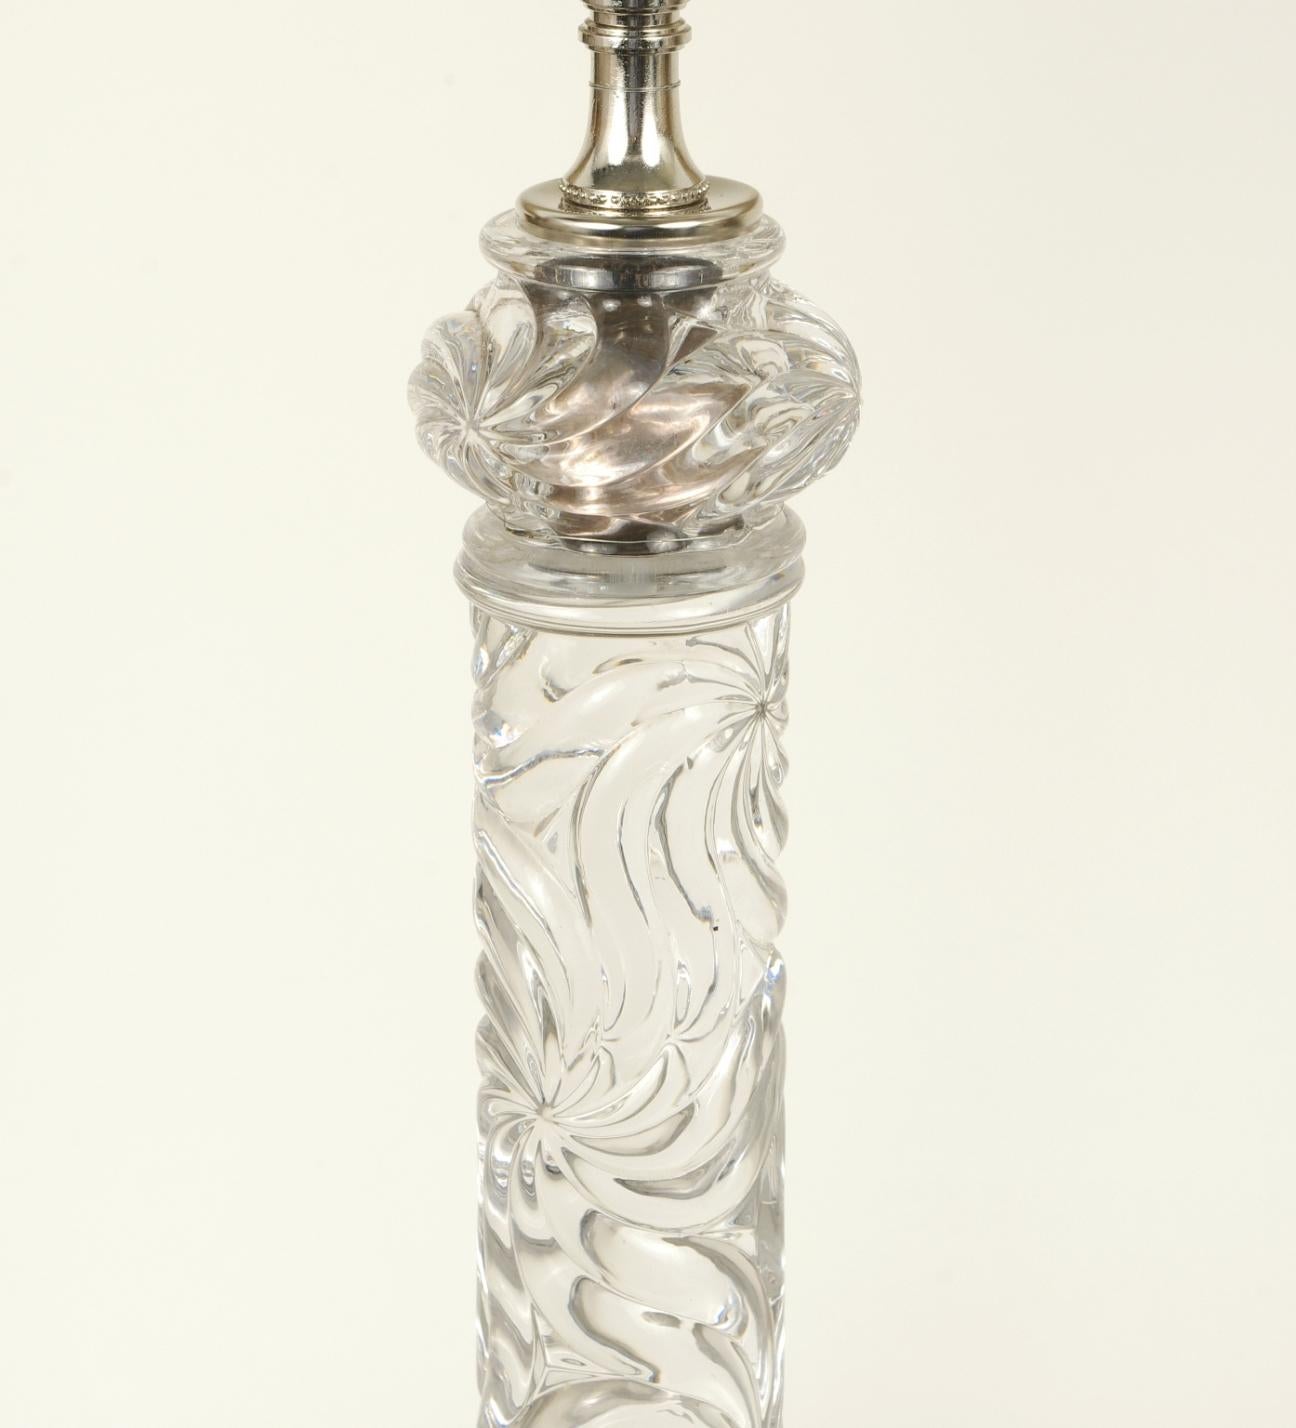 Baccarat crystal lamp, each of the four parts molded with an overall swirl pattern, now French wired. 

Molded 